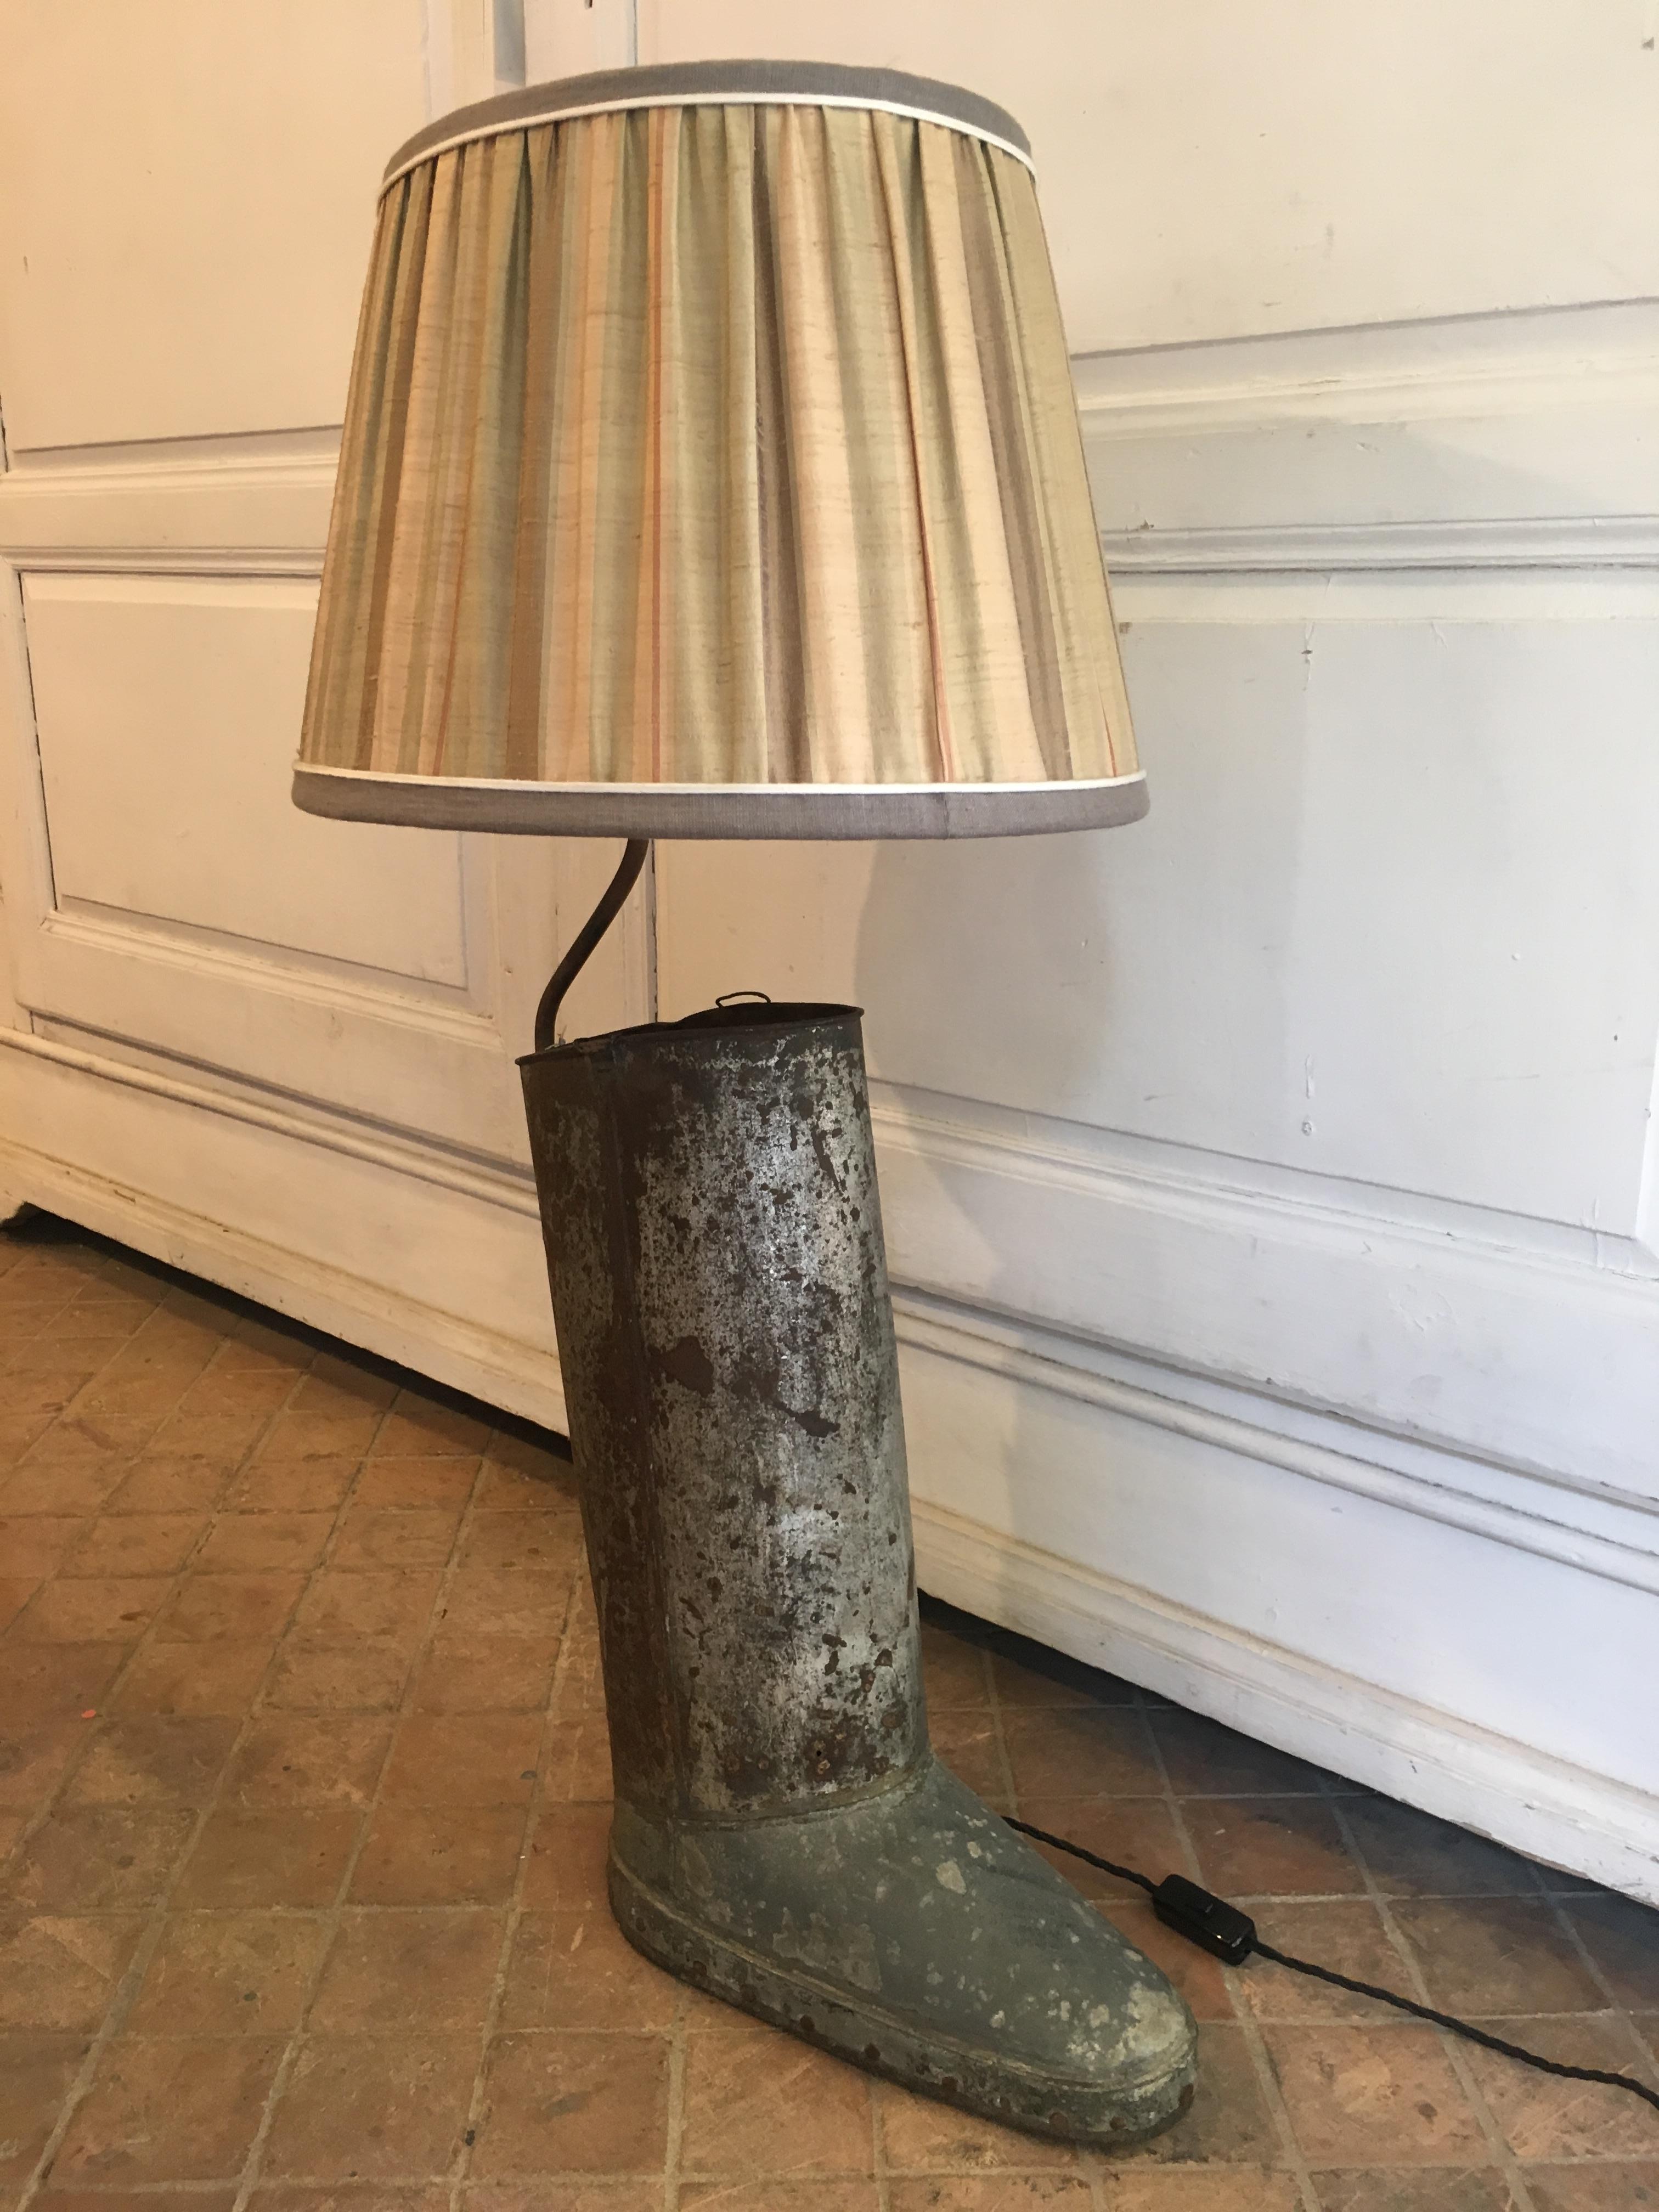 French table lamp made with an old iron boot ombrella stand from 20th century.